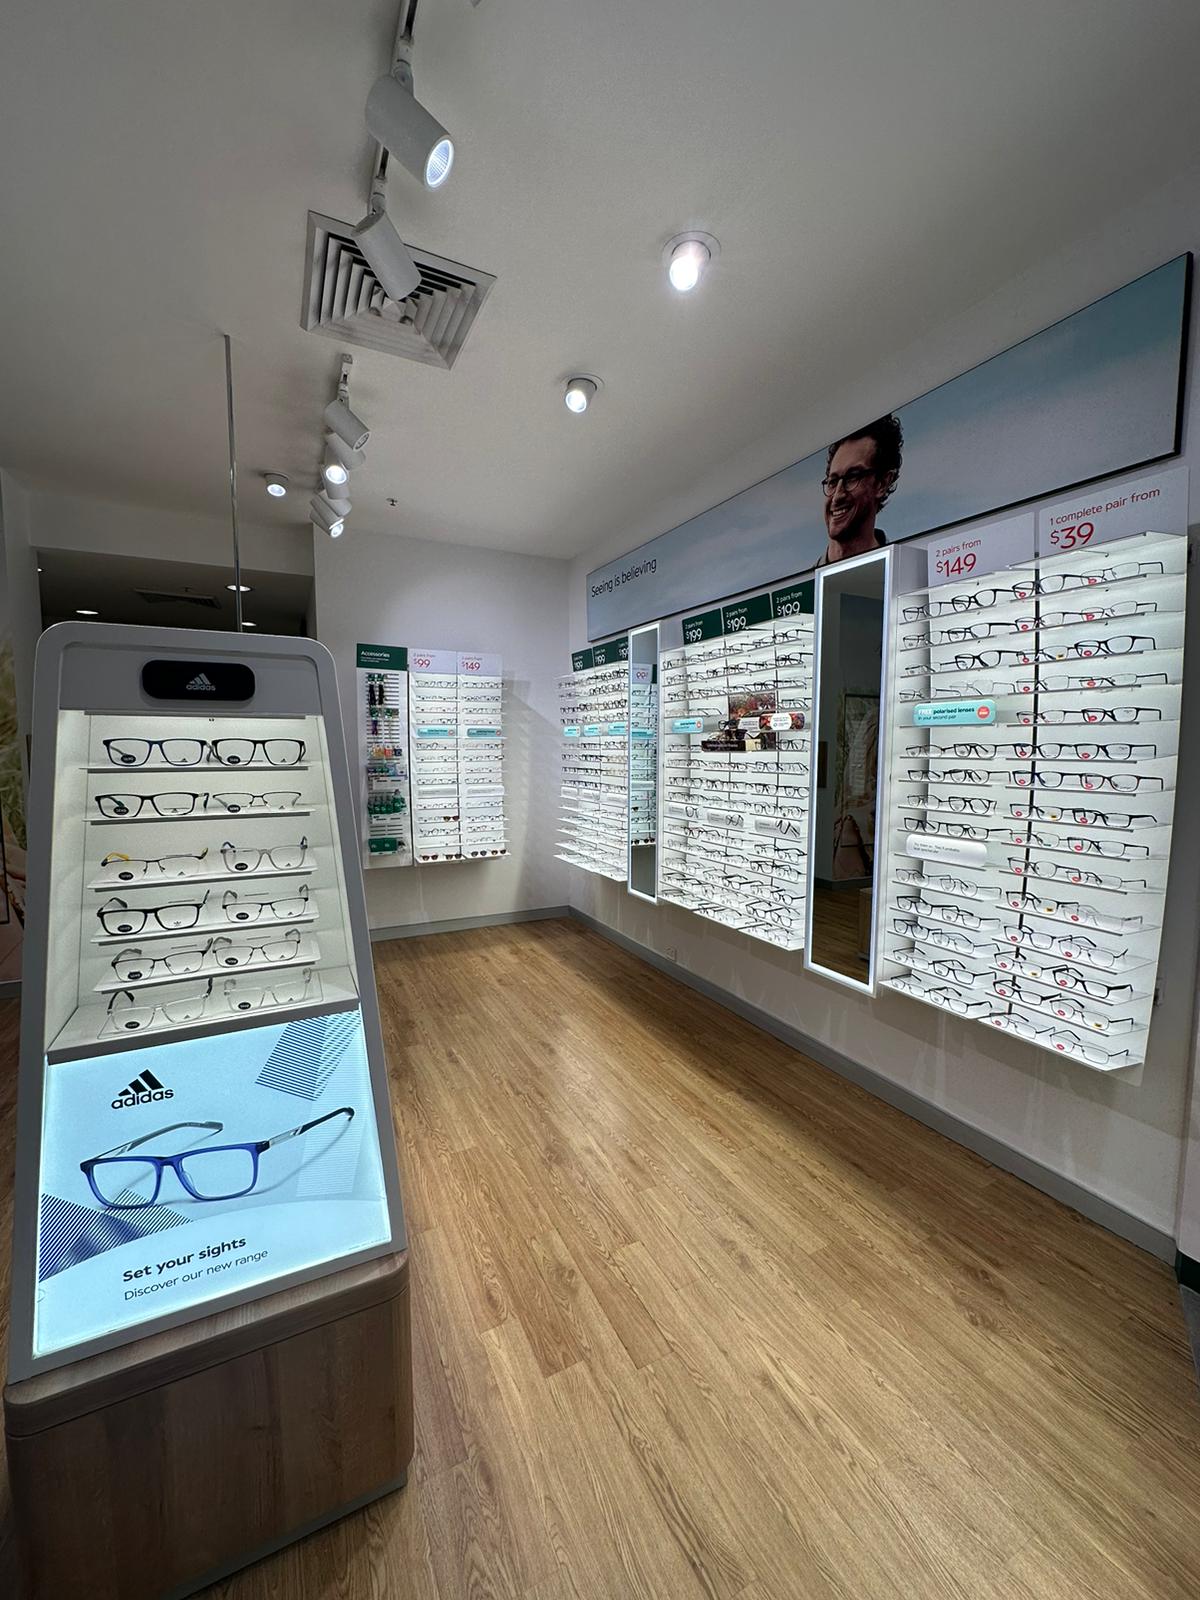 Images Specsavers Optometrists & Audiology - Eastgardens Westfield